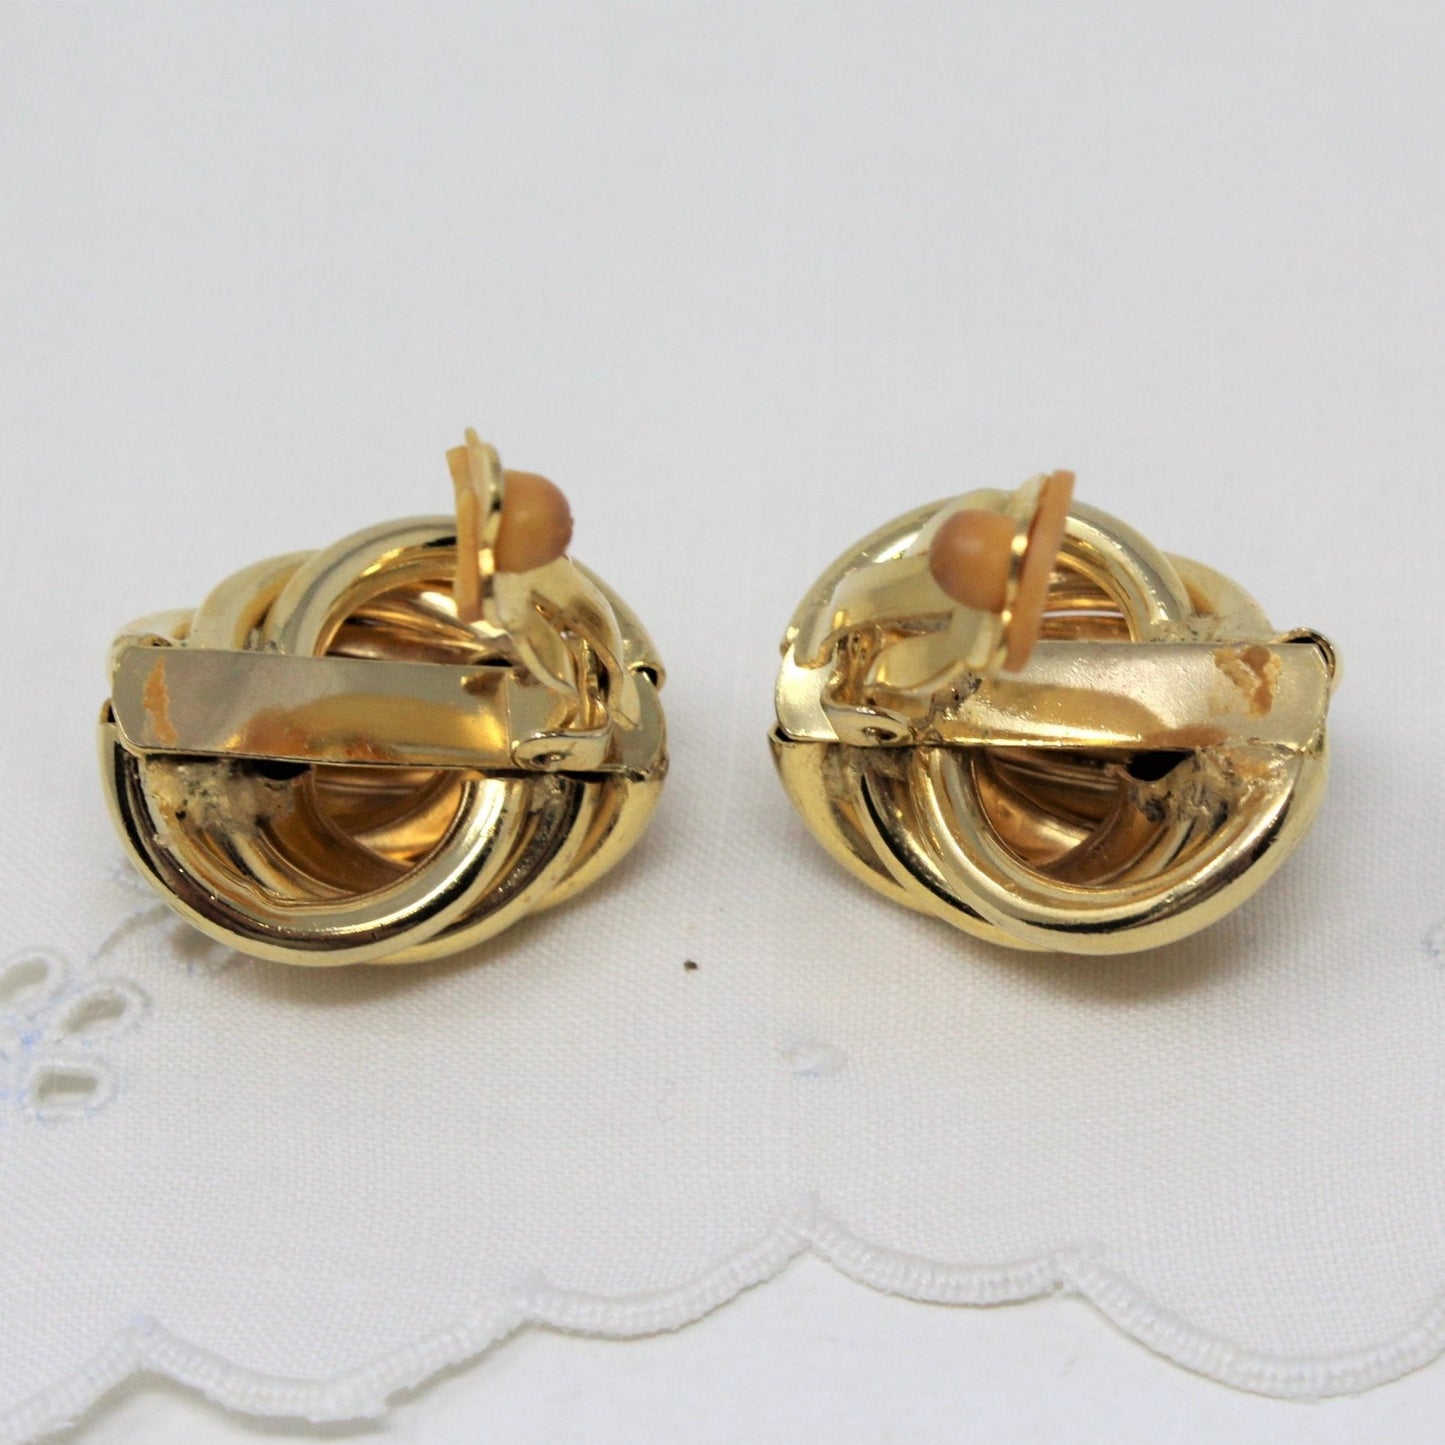 Earrings, Knotted Ovals, Gold Tone Clips, Vintage